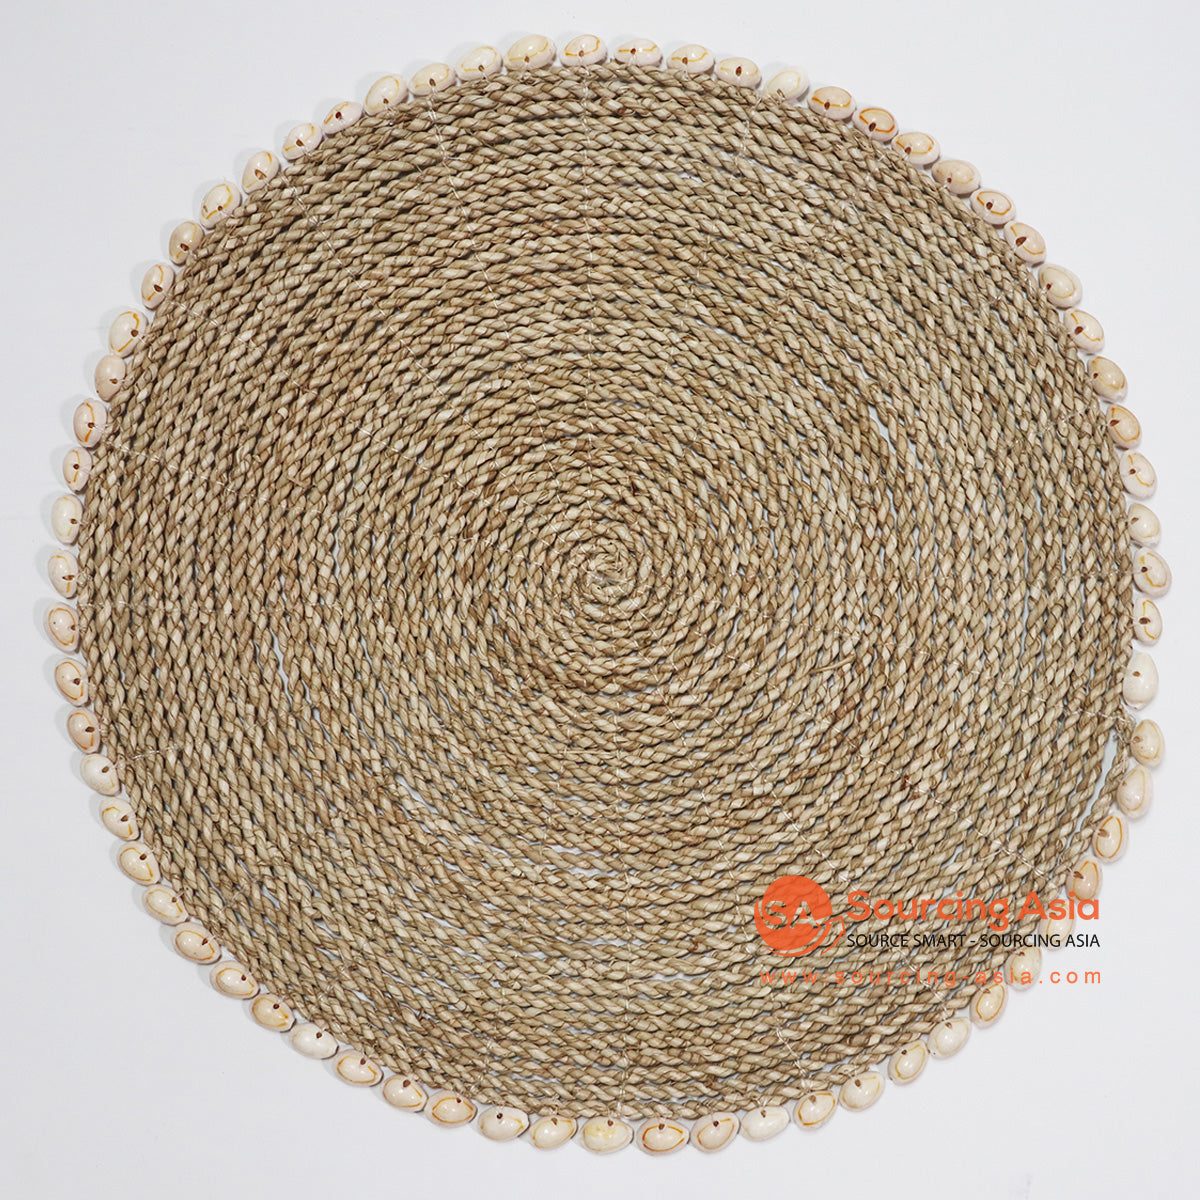 HBSC004 NATURAL SEA GRASS ROUND PLACEMAT WITH SHELL